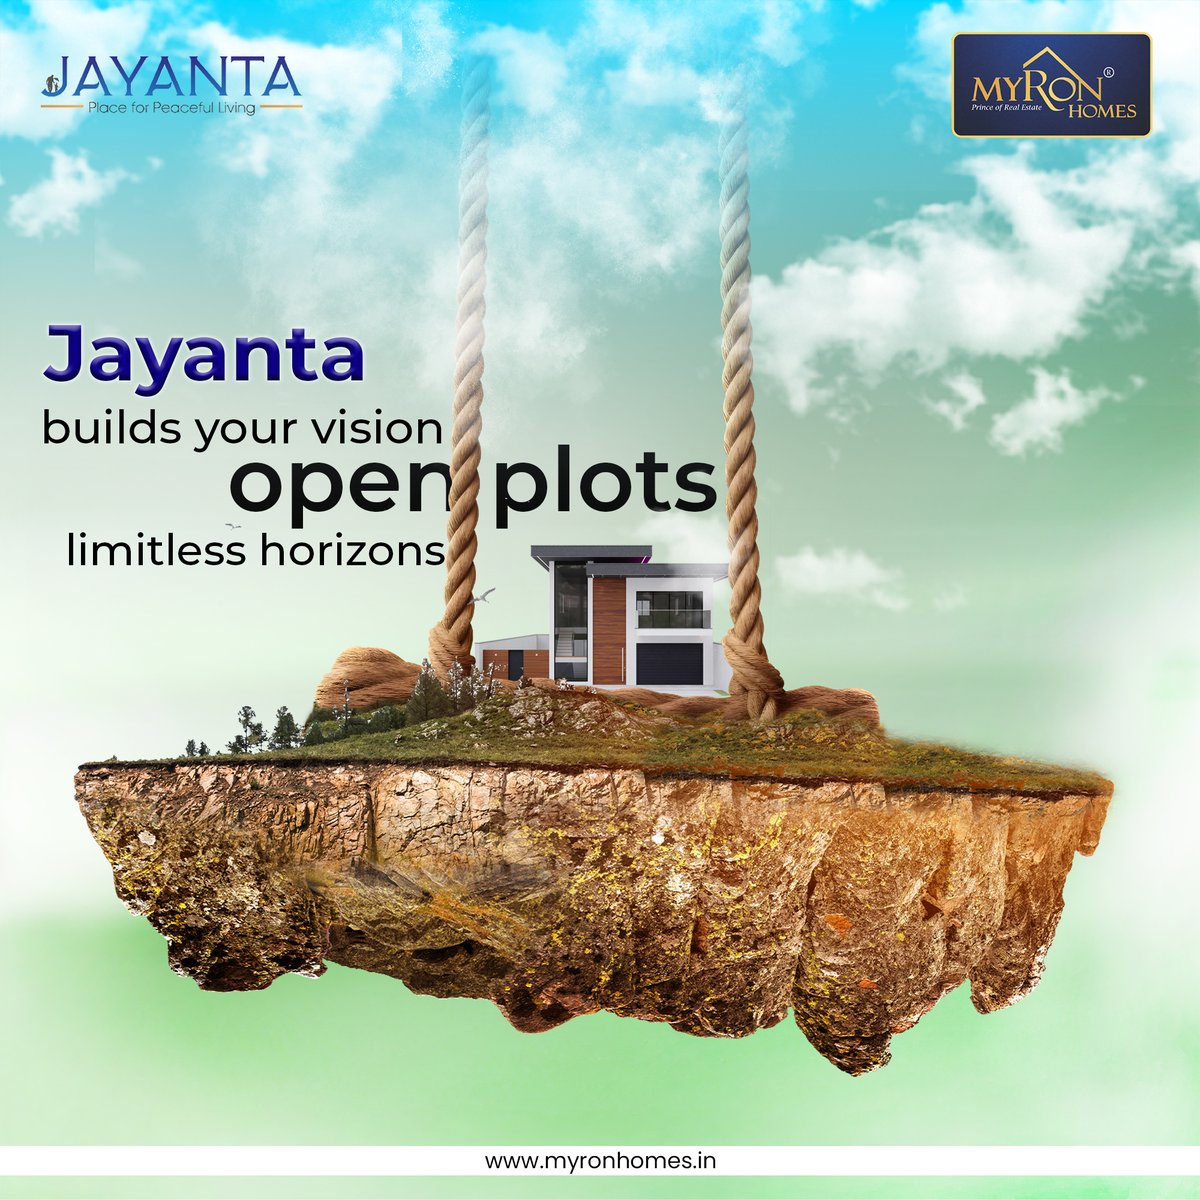 Jayanta opens doors to a world of endless inspiration with our visionary open plots. Let your dreams take flight against the backdrop of limitless horizons as you design the home you've always desired.

#jayanta #Myronhomes #myronhomesinfra #jayantaopenplots #PoweringTheFuture